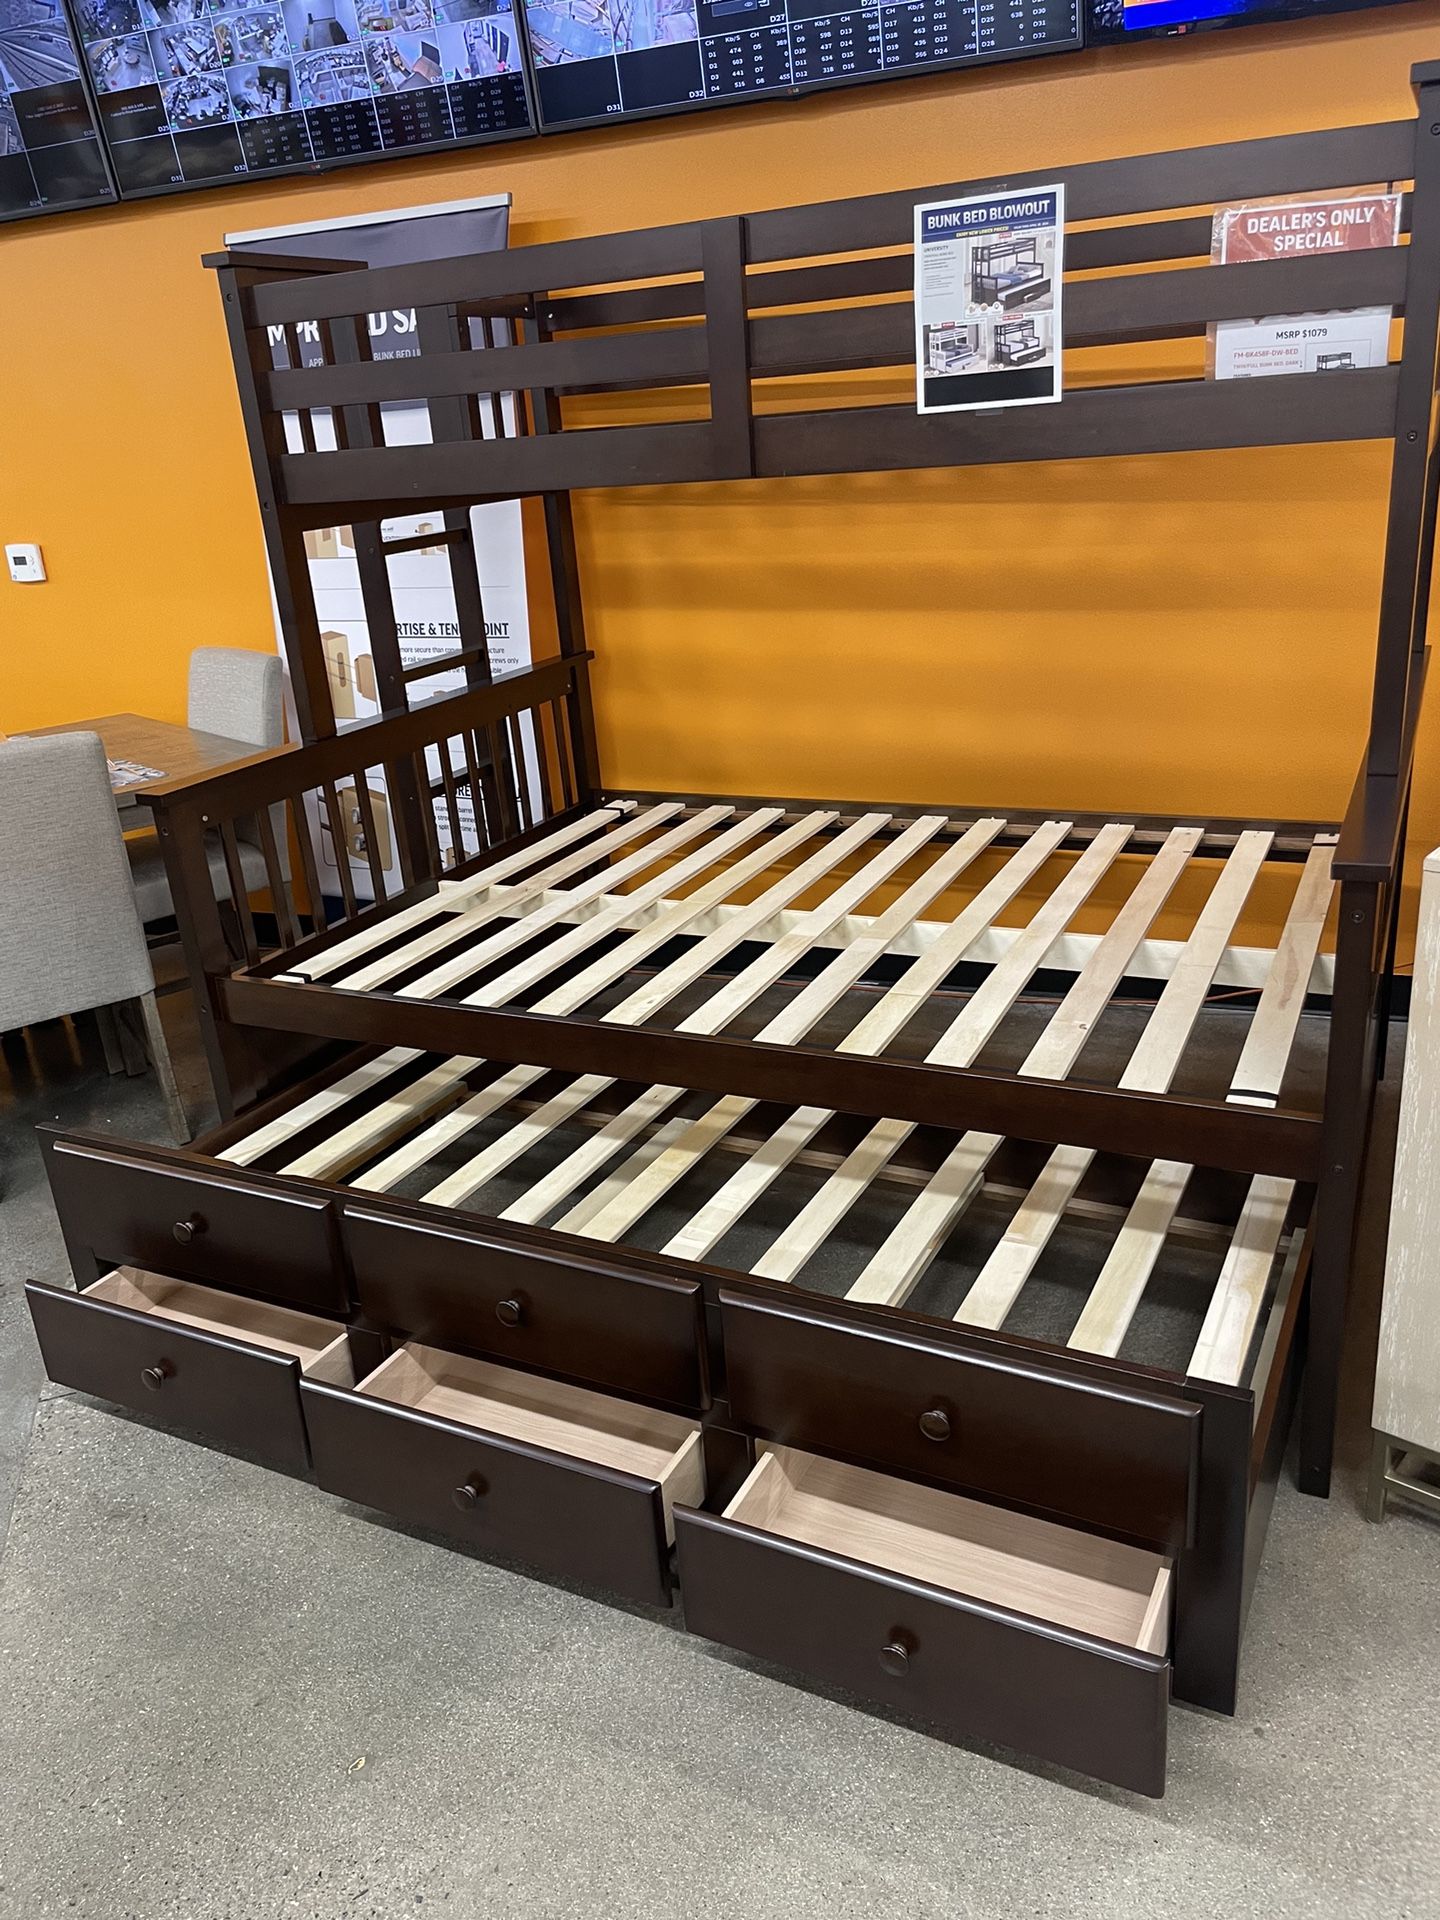 Twin/full bunk bed with twin drawer trundle. $499 without mattresses. $775 with 3 mattresses. 3 colors walnut, white, grey. Assembly required. Assembl